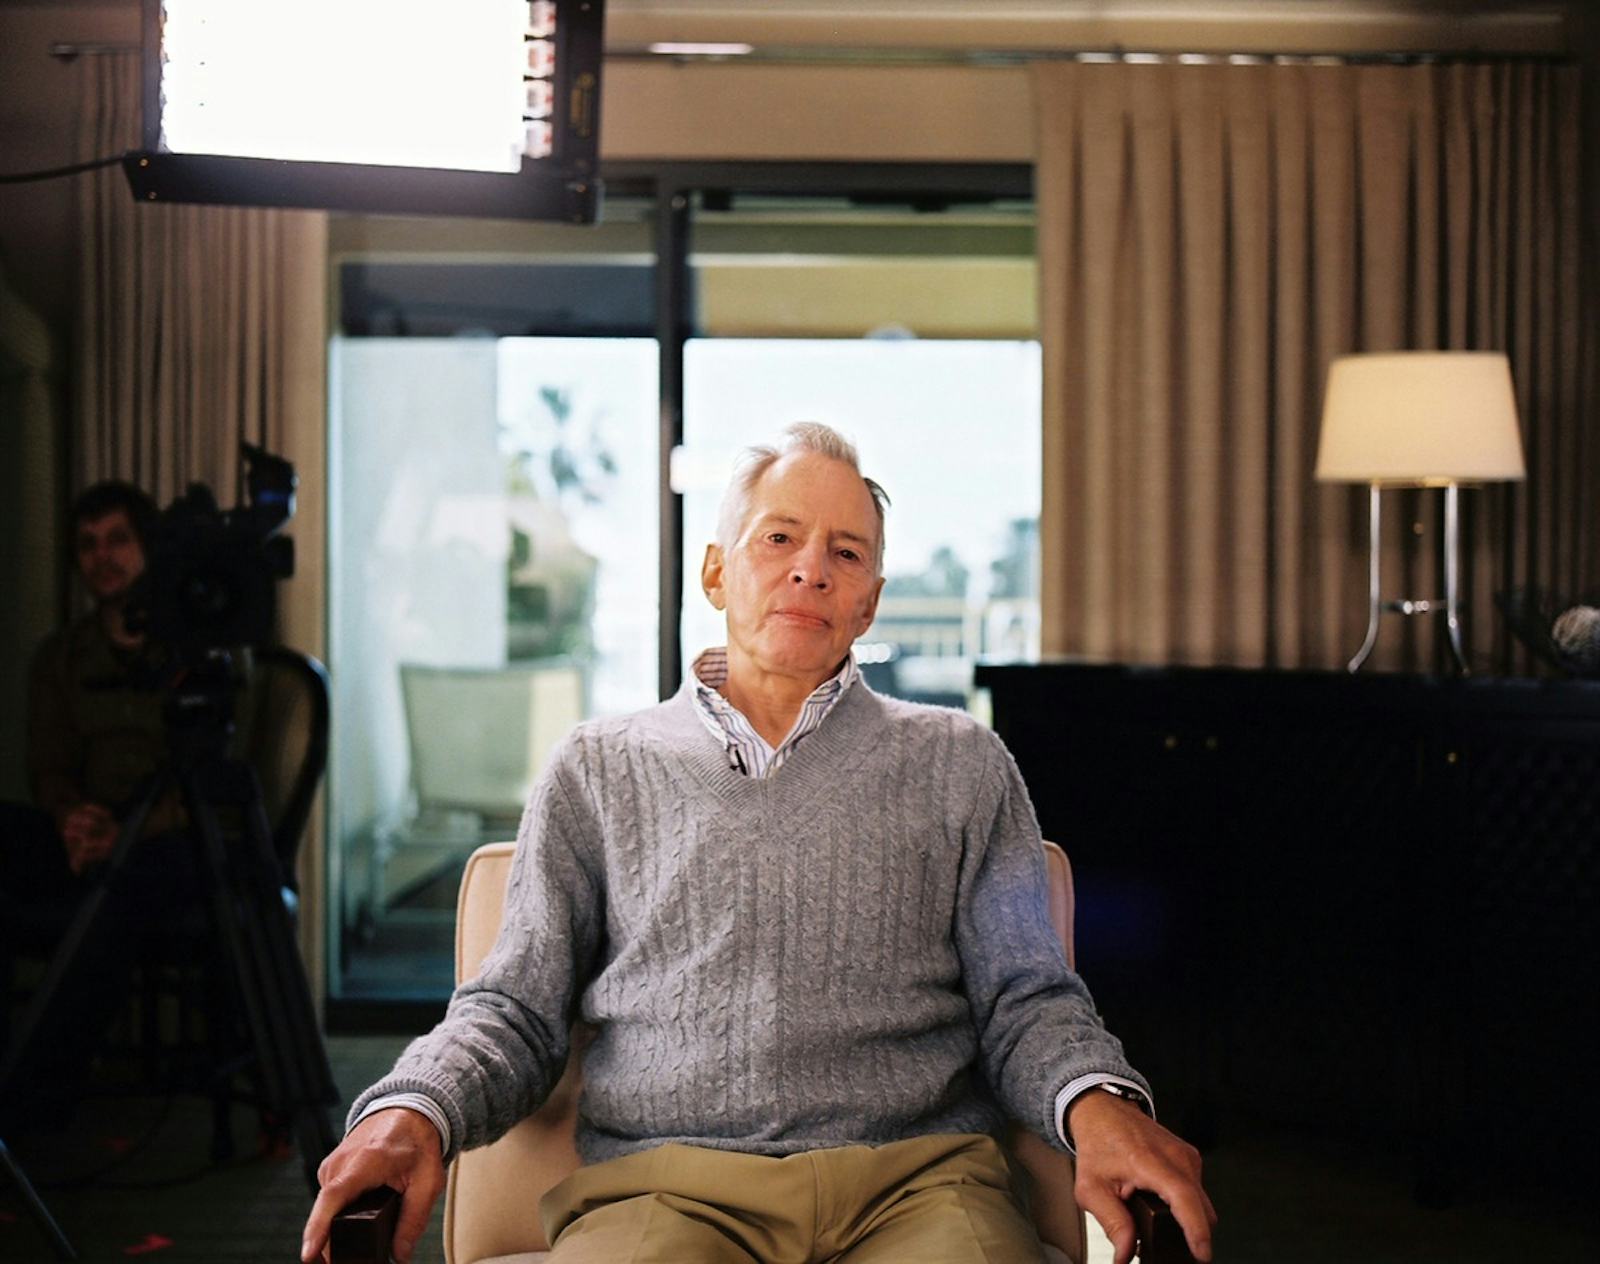 How To Watch The Jinx Online And Catch Up On The Only Thing People Are